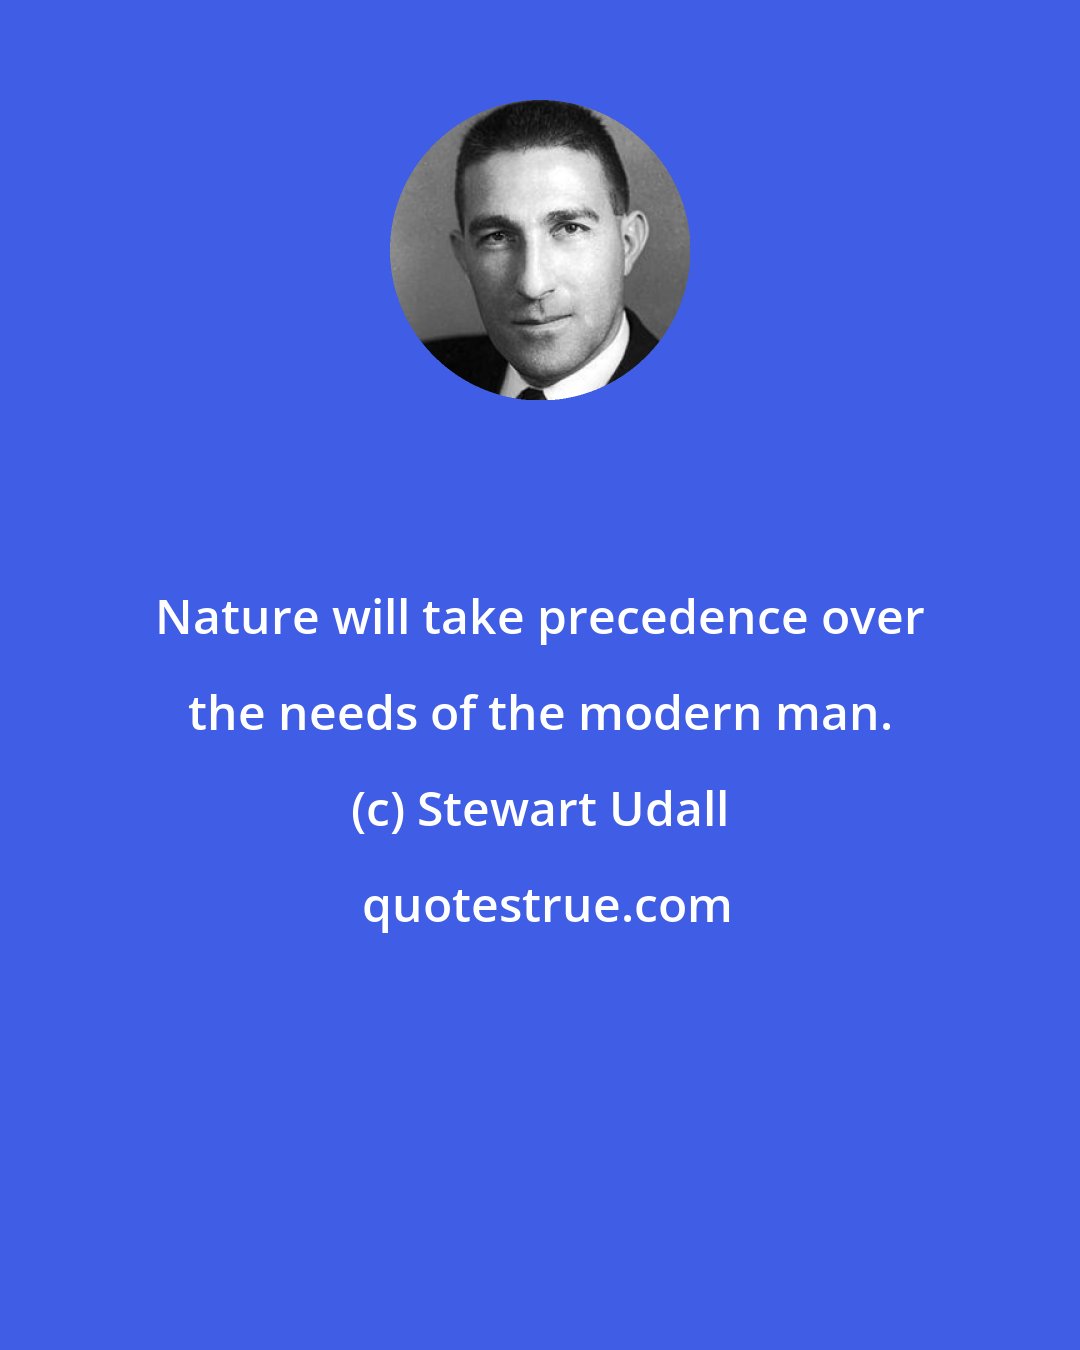 Stewart Udall: Nature will take precedence over the needs of the modern man.